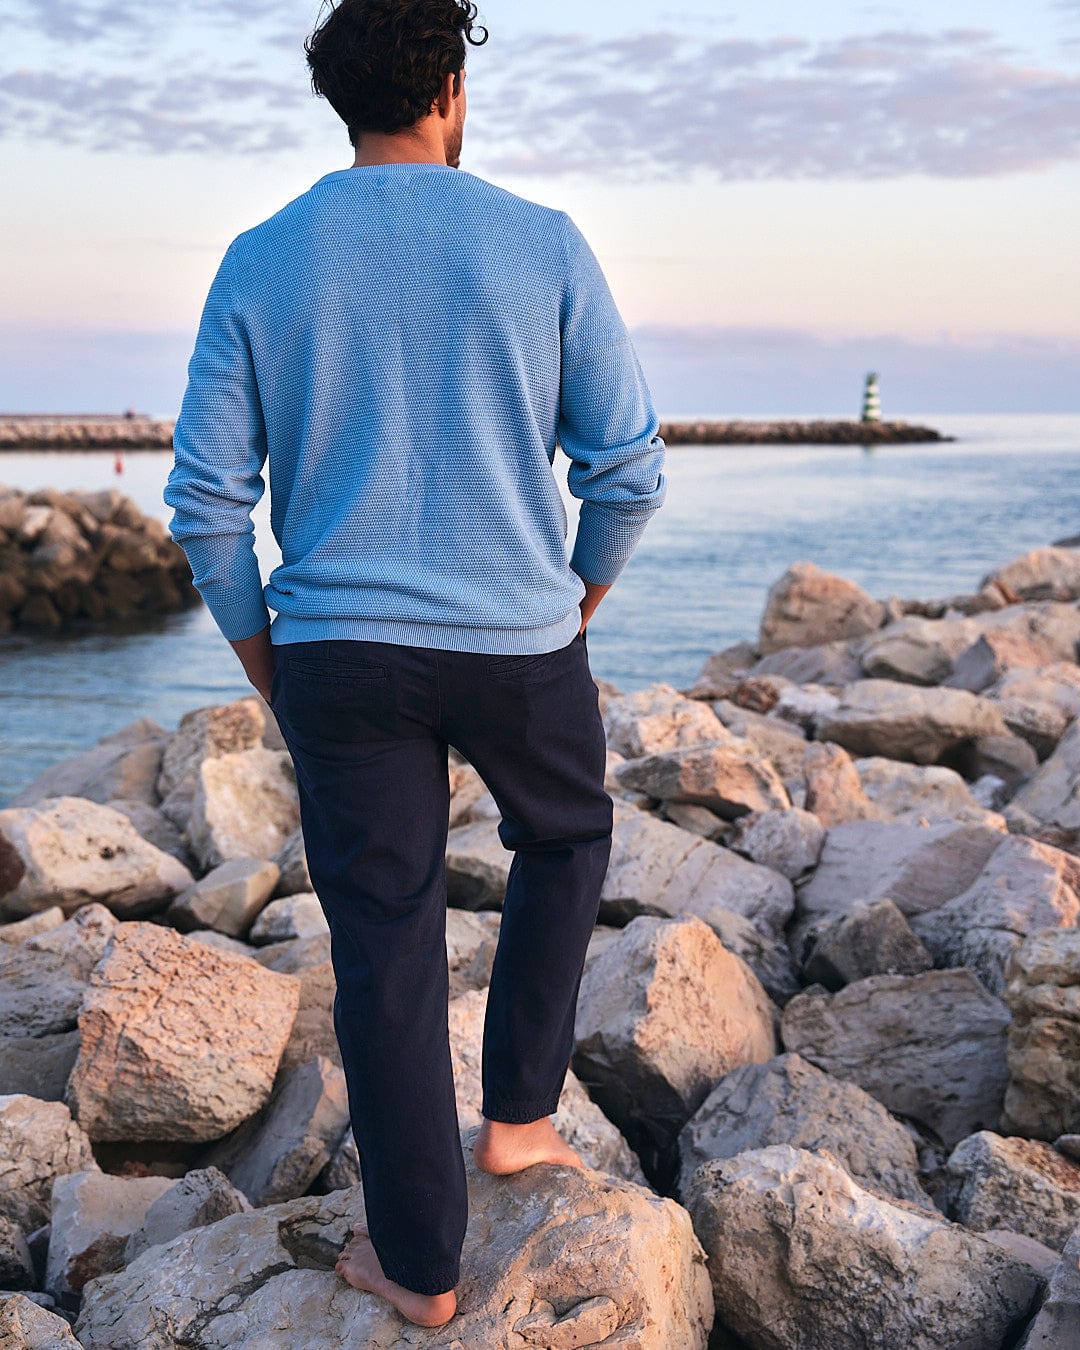 A man wearing Saltrock Meddon - Mens Twill Trouser - Navy cuffed twill trousers, standing on rocks, mesmerized by the vastness of the ocean during his outdoor adventure.